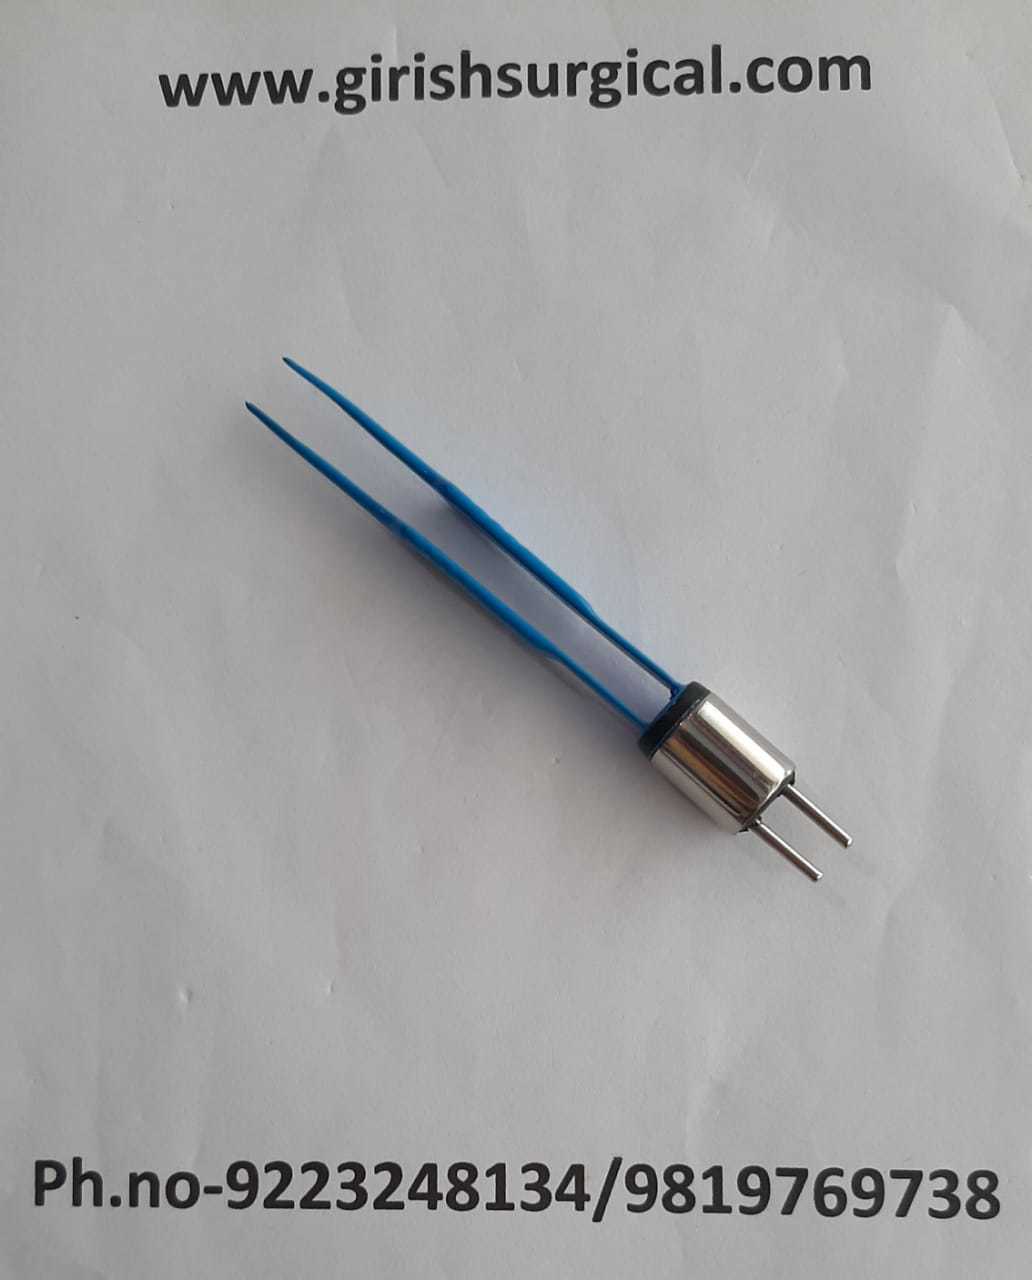 Straight Small Indian Forceps ( American )